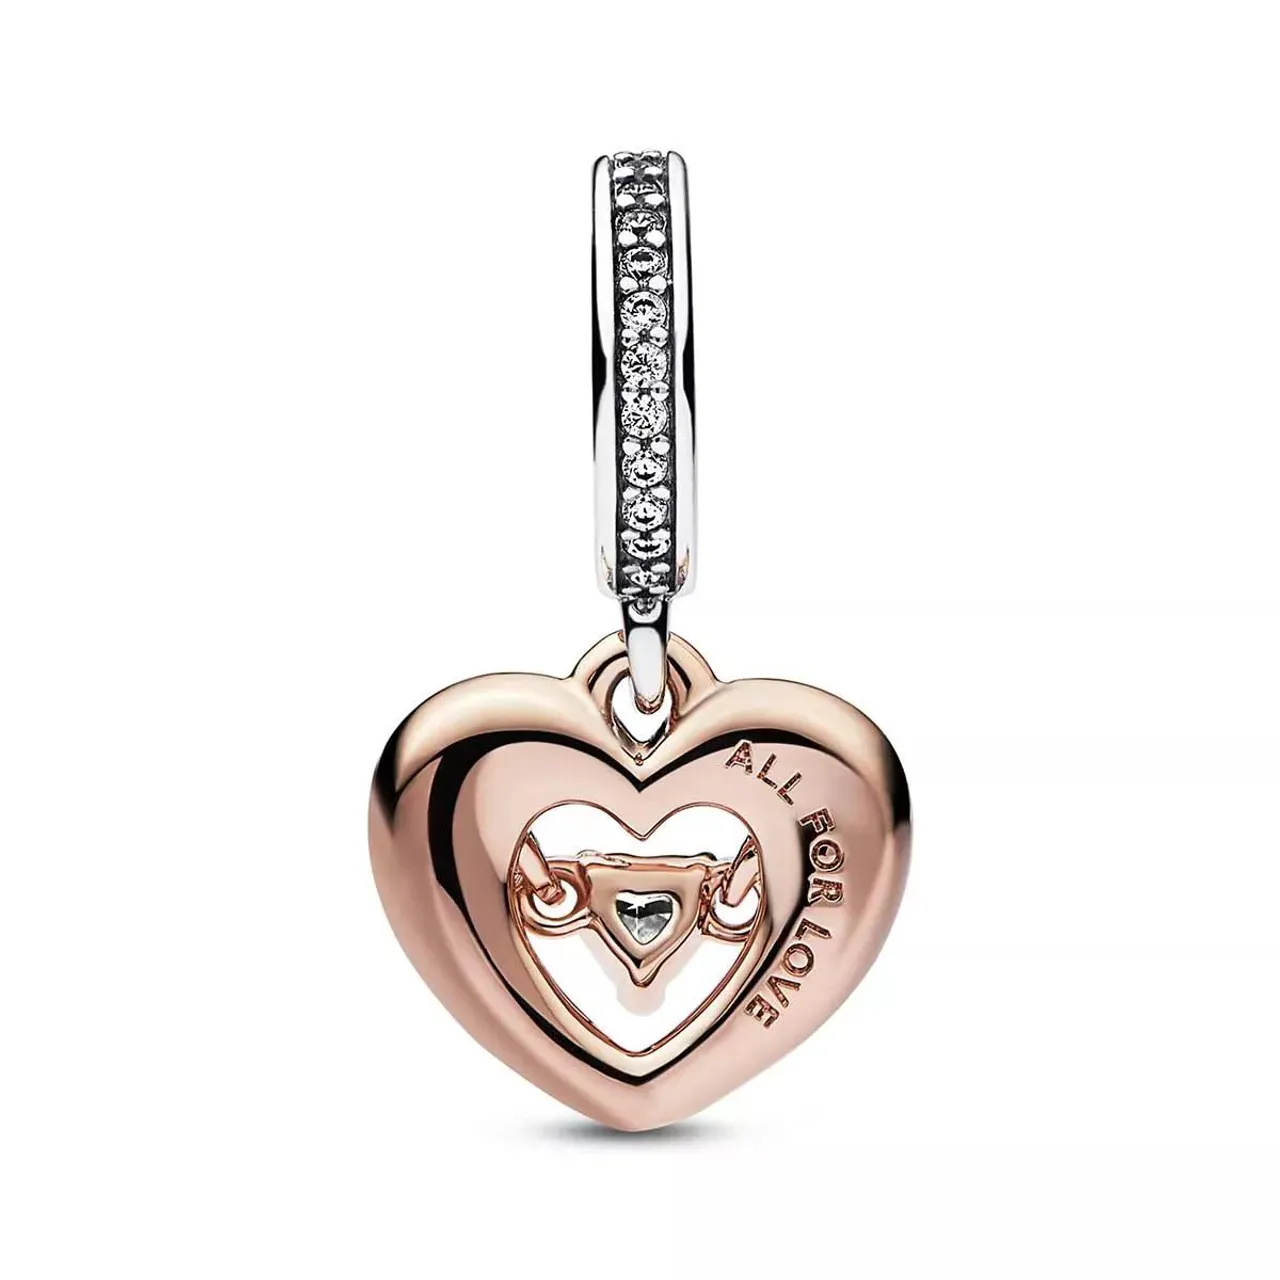 Pandora Pendants & Charms - Open heart sterling silver and 14k rose gold-plate - quarz - Pendants & Charms for ladies